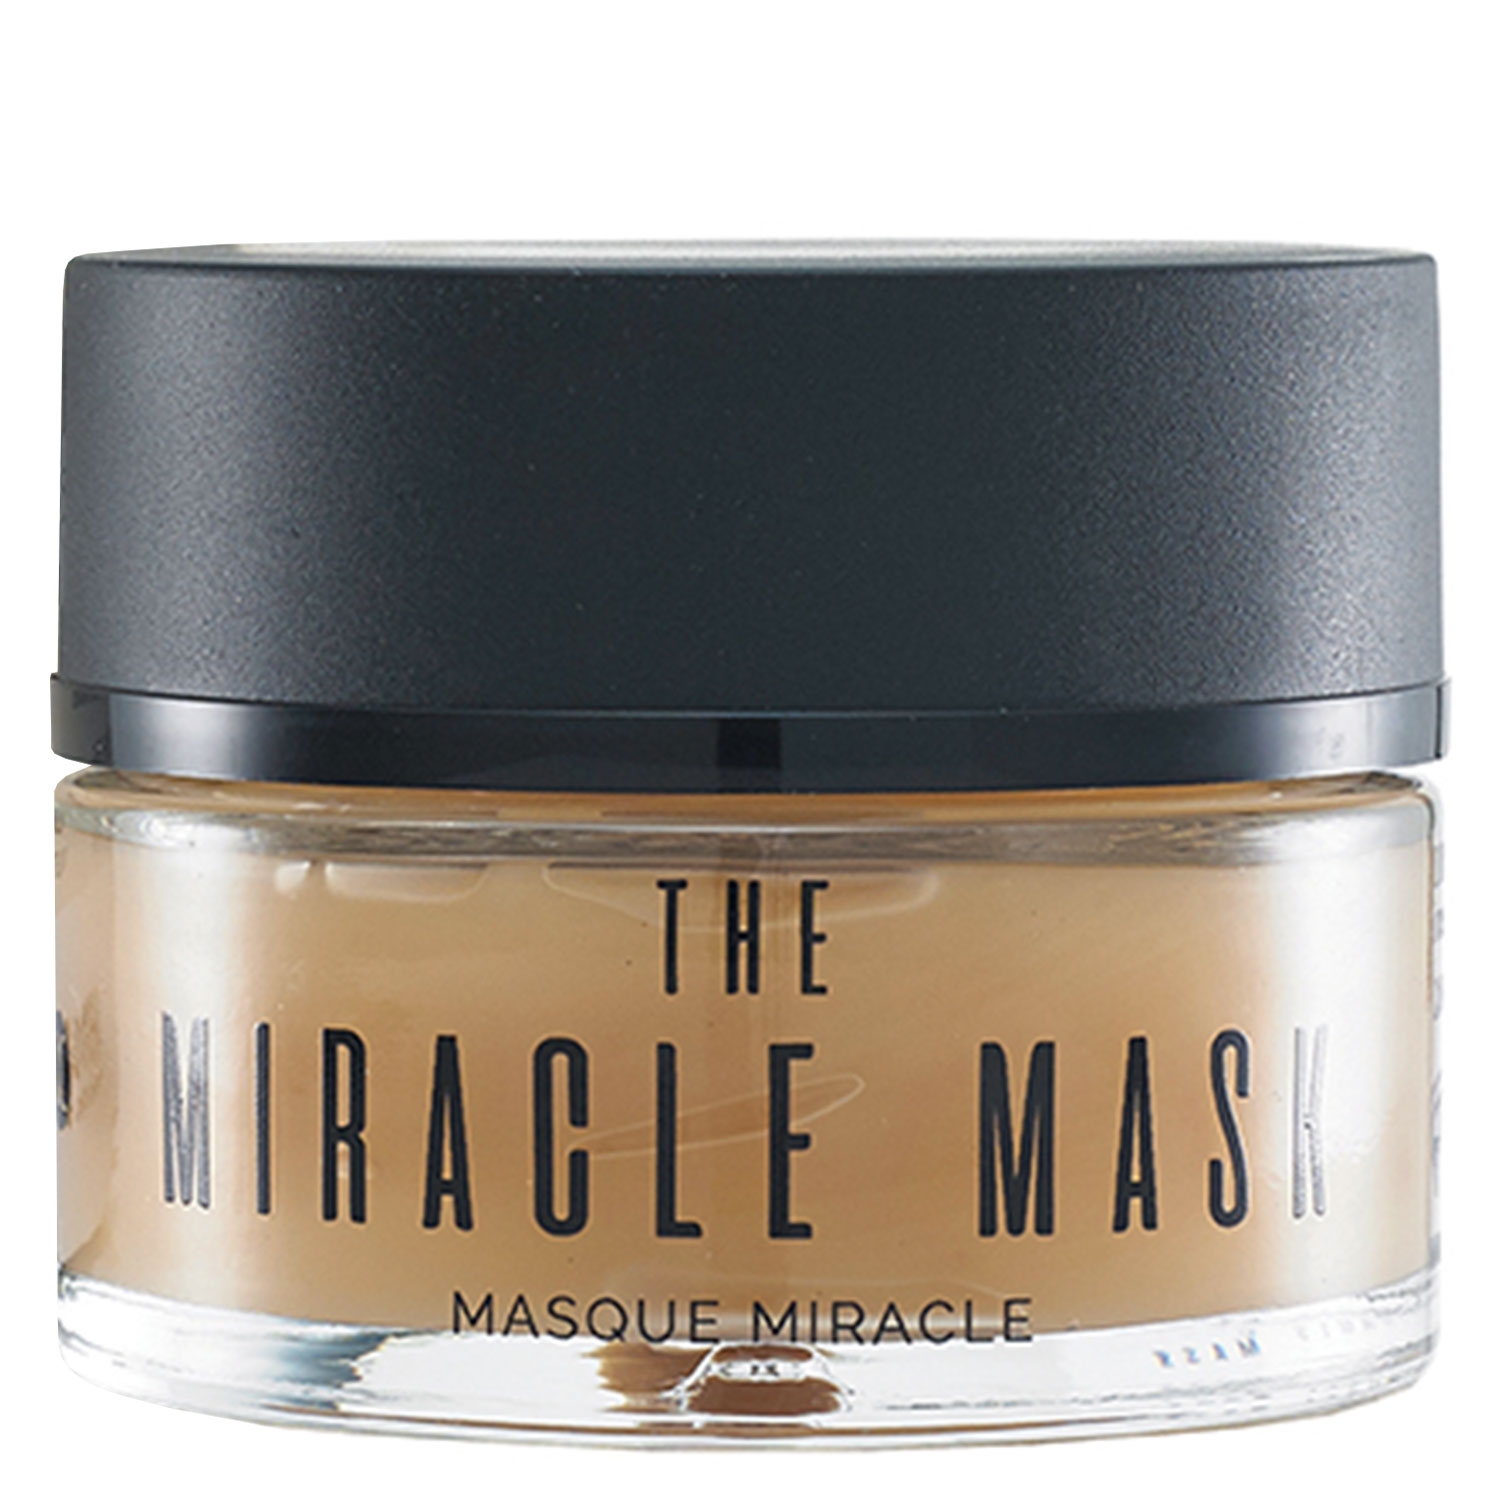 Product image from sienna x - The Miracle Mask